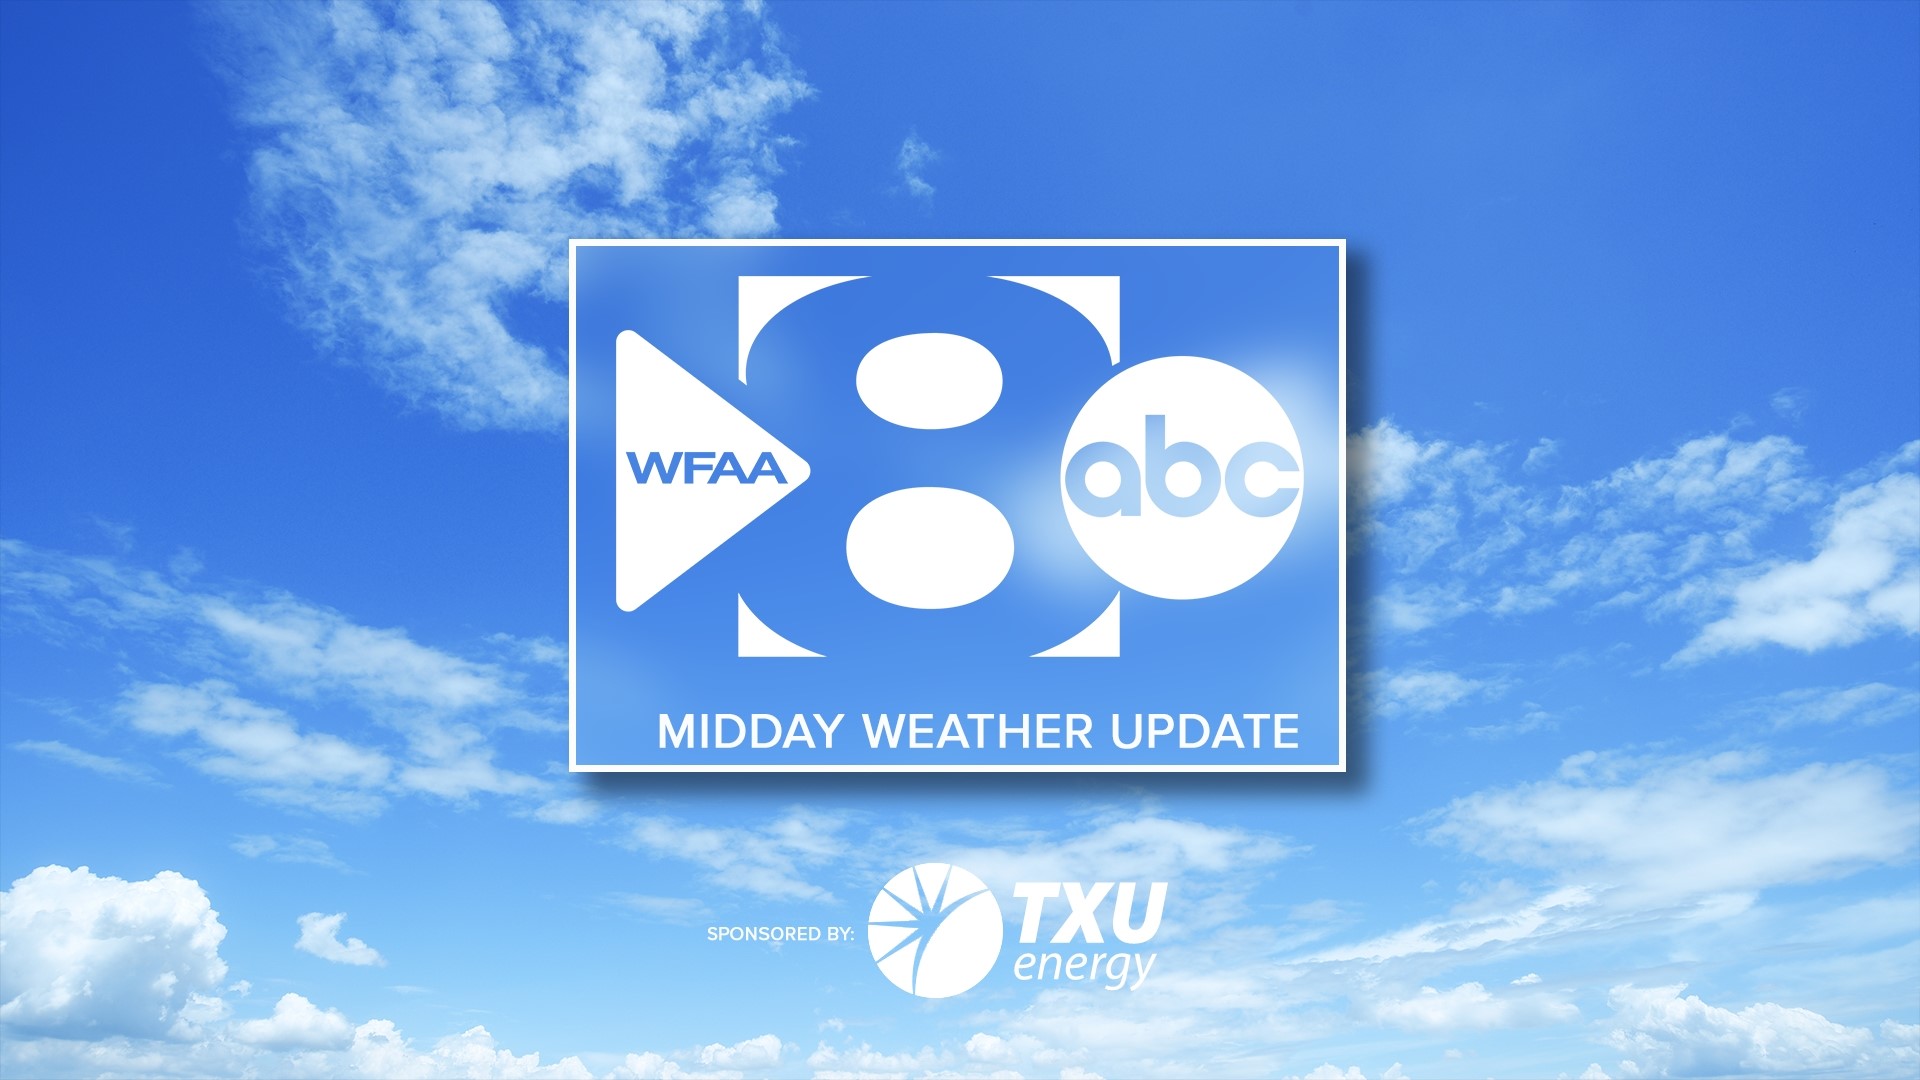 DFW Weather: August 17 midday forecast update